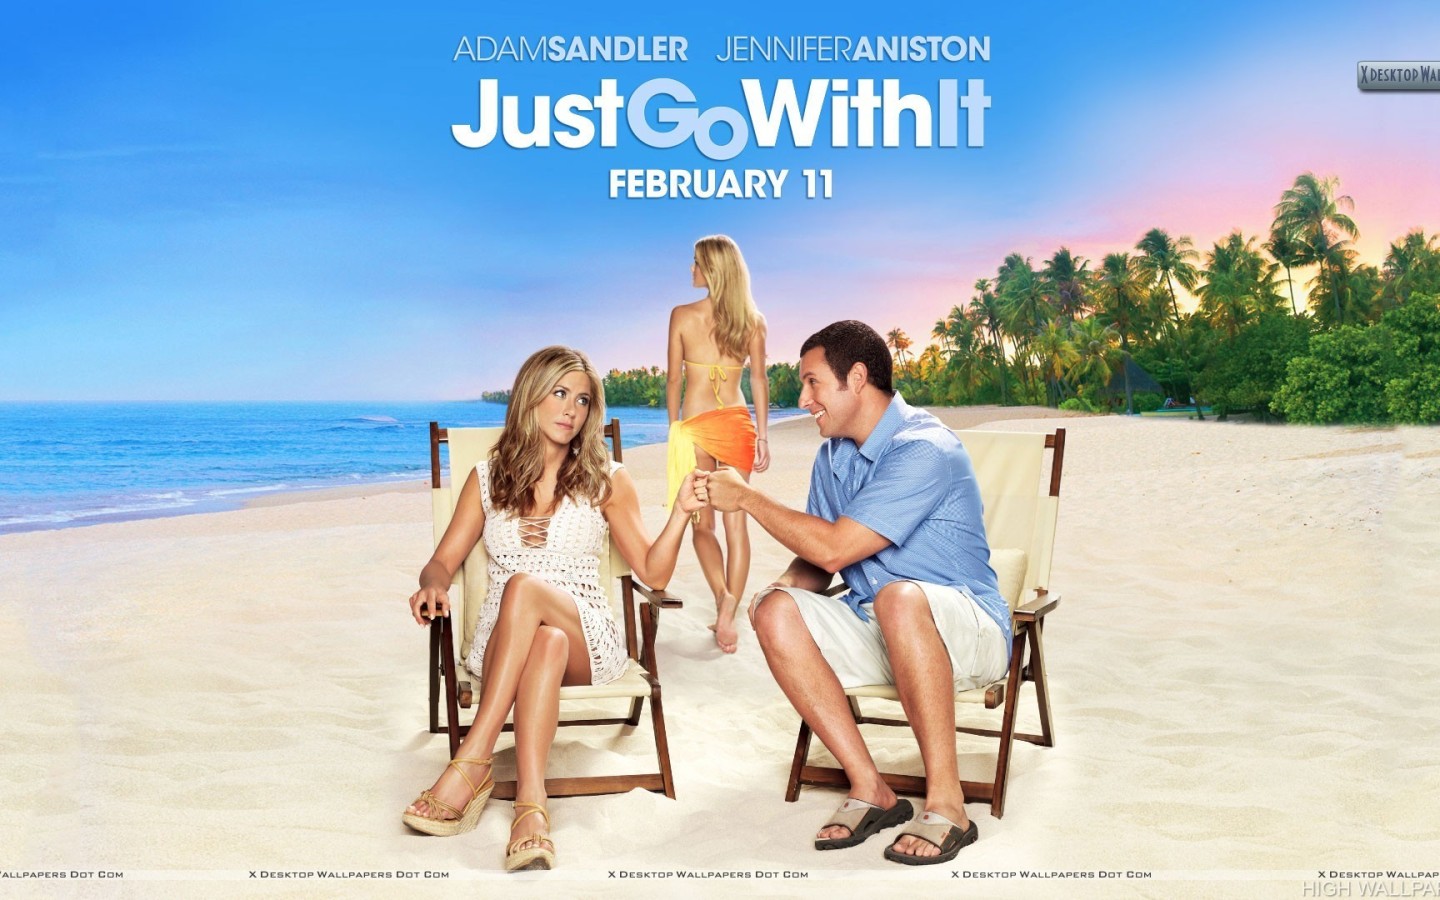 Jennifer Aniston And Adam Sandler In Just Go With It HD Wallpaper